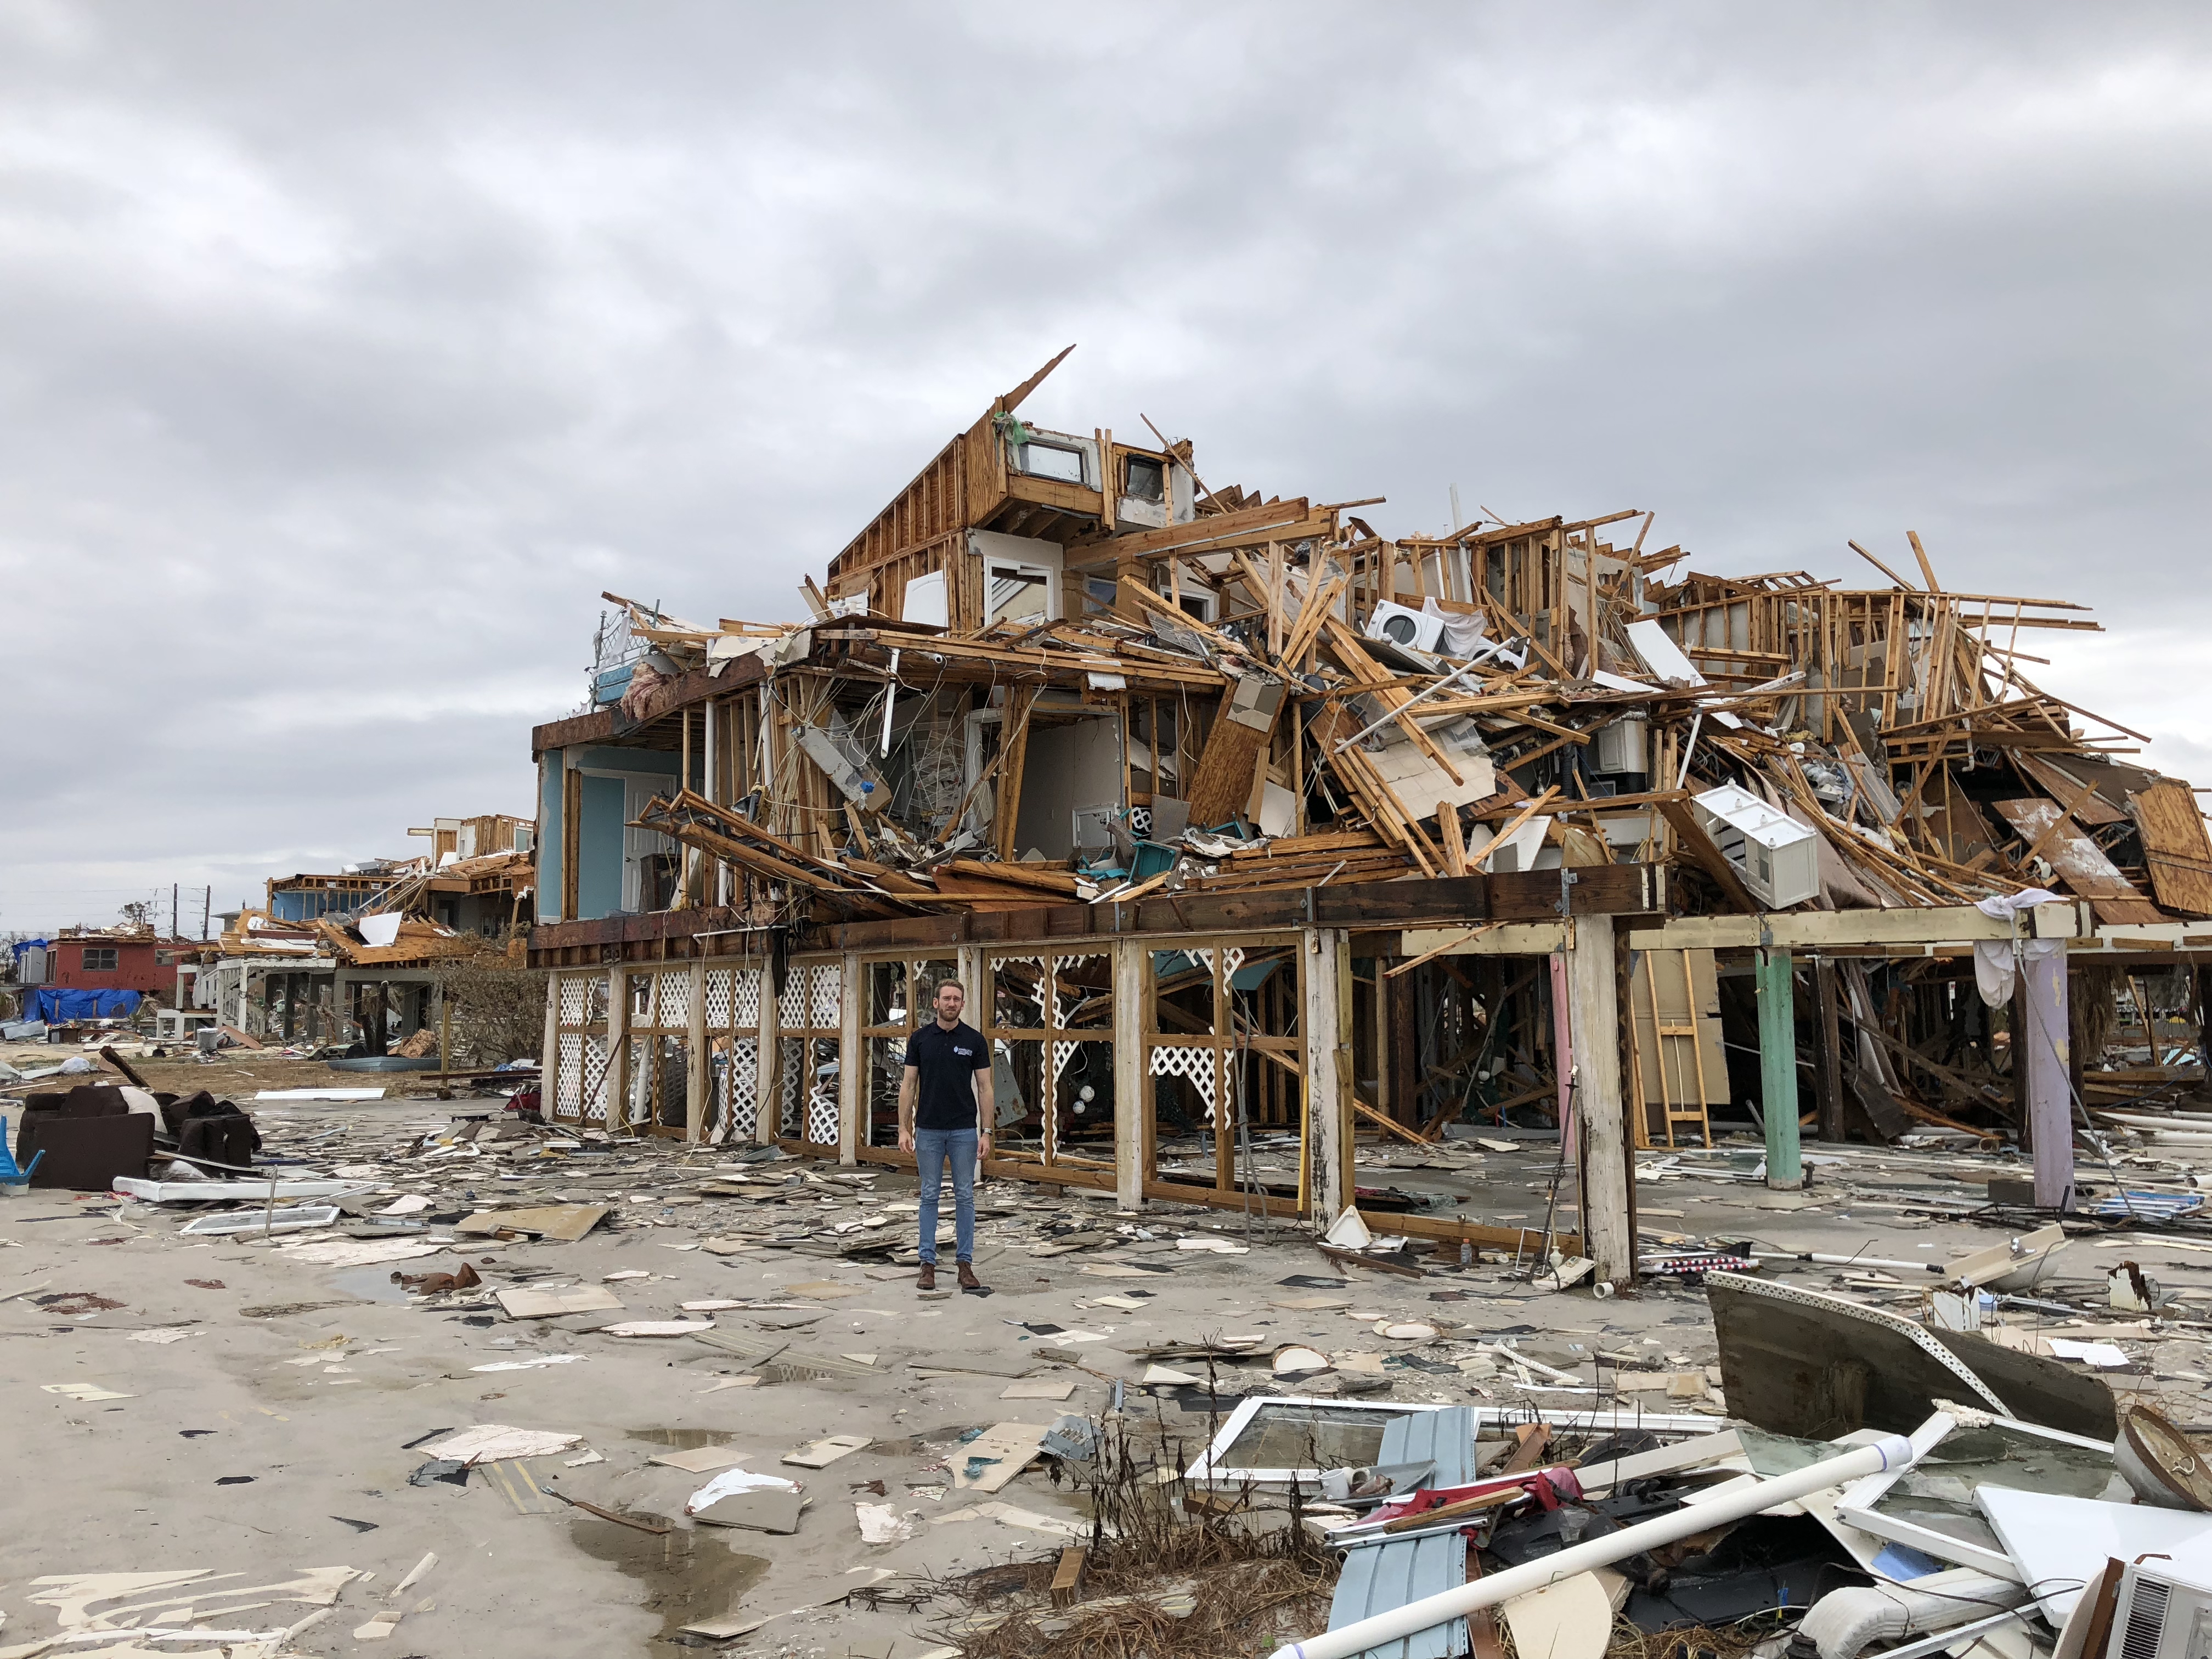 Destroyed House from Hurricane Michael by Daniel Smith, 2018